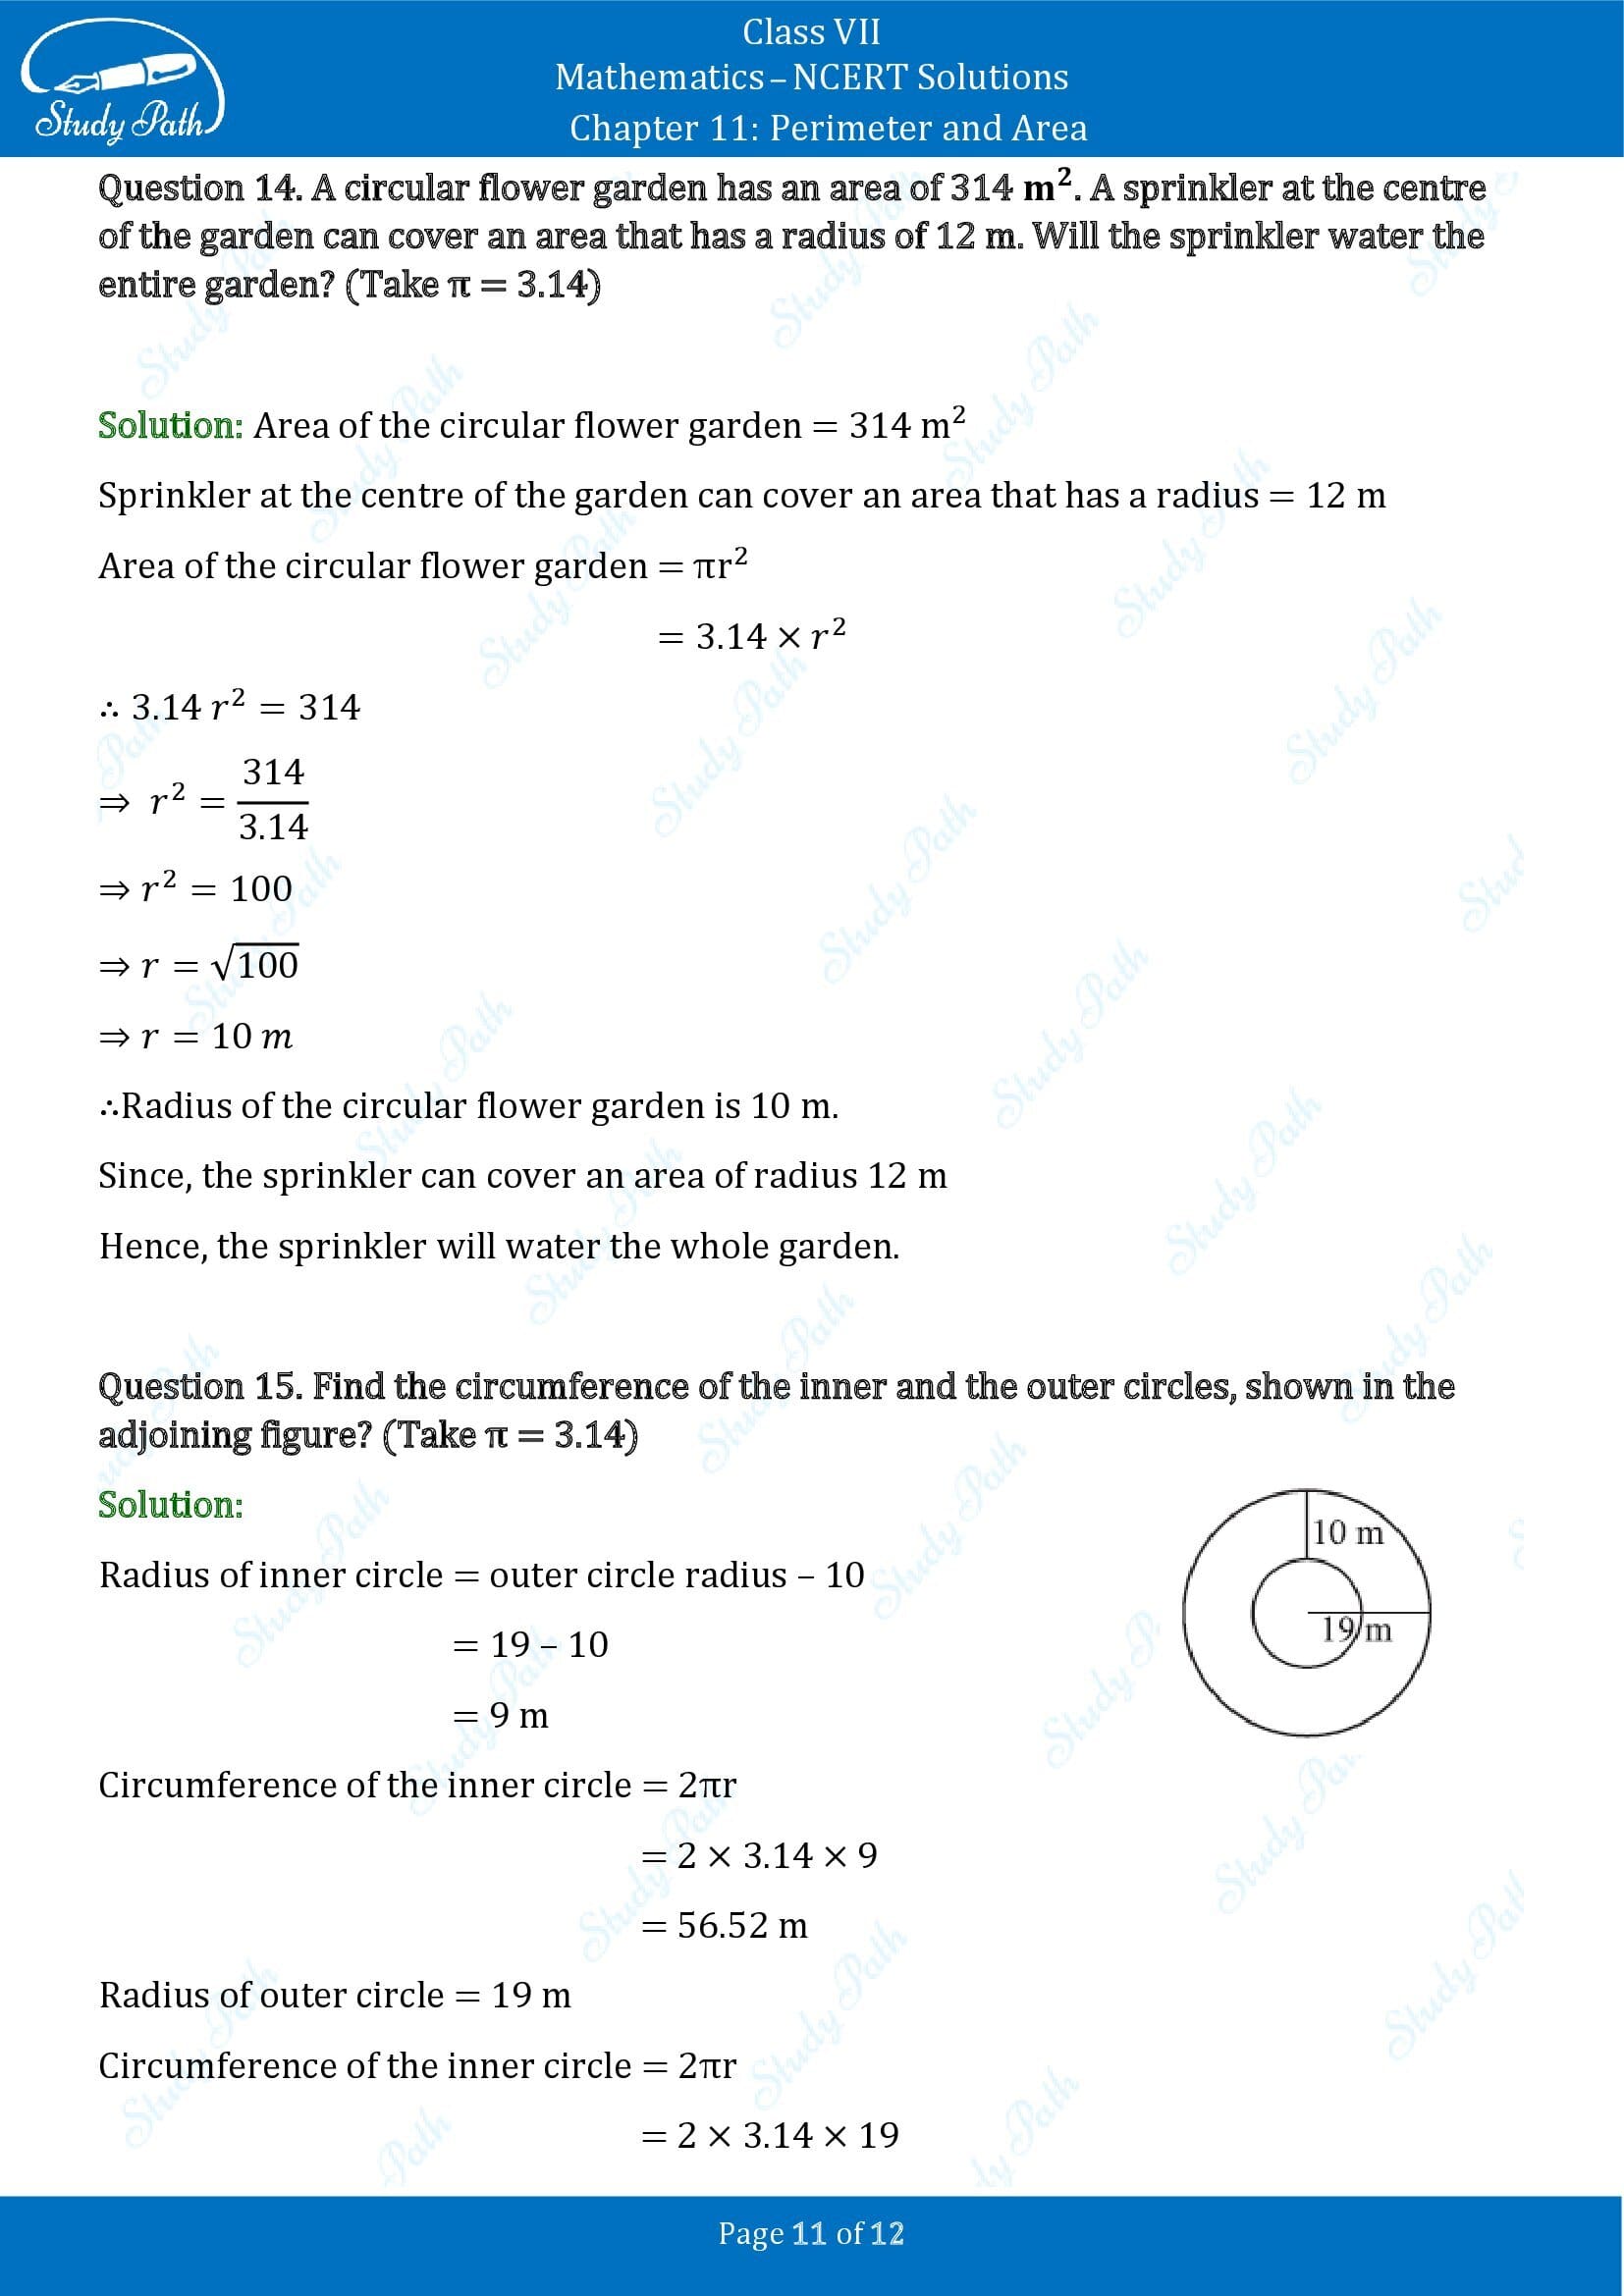 NCERT Solutions for Class 7 Maths Chapter 11 Perimeter and Area Exercise 11.3 00011